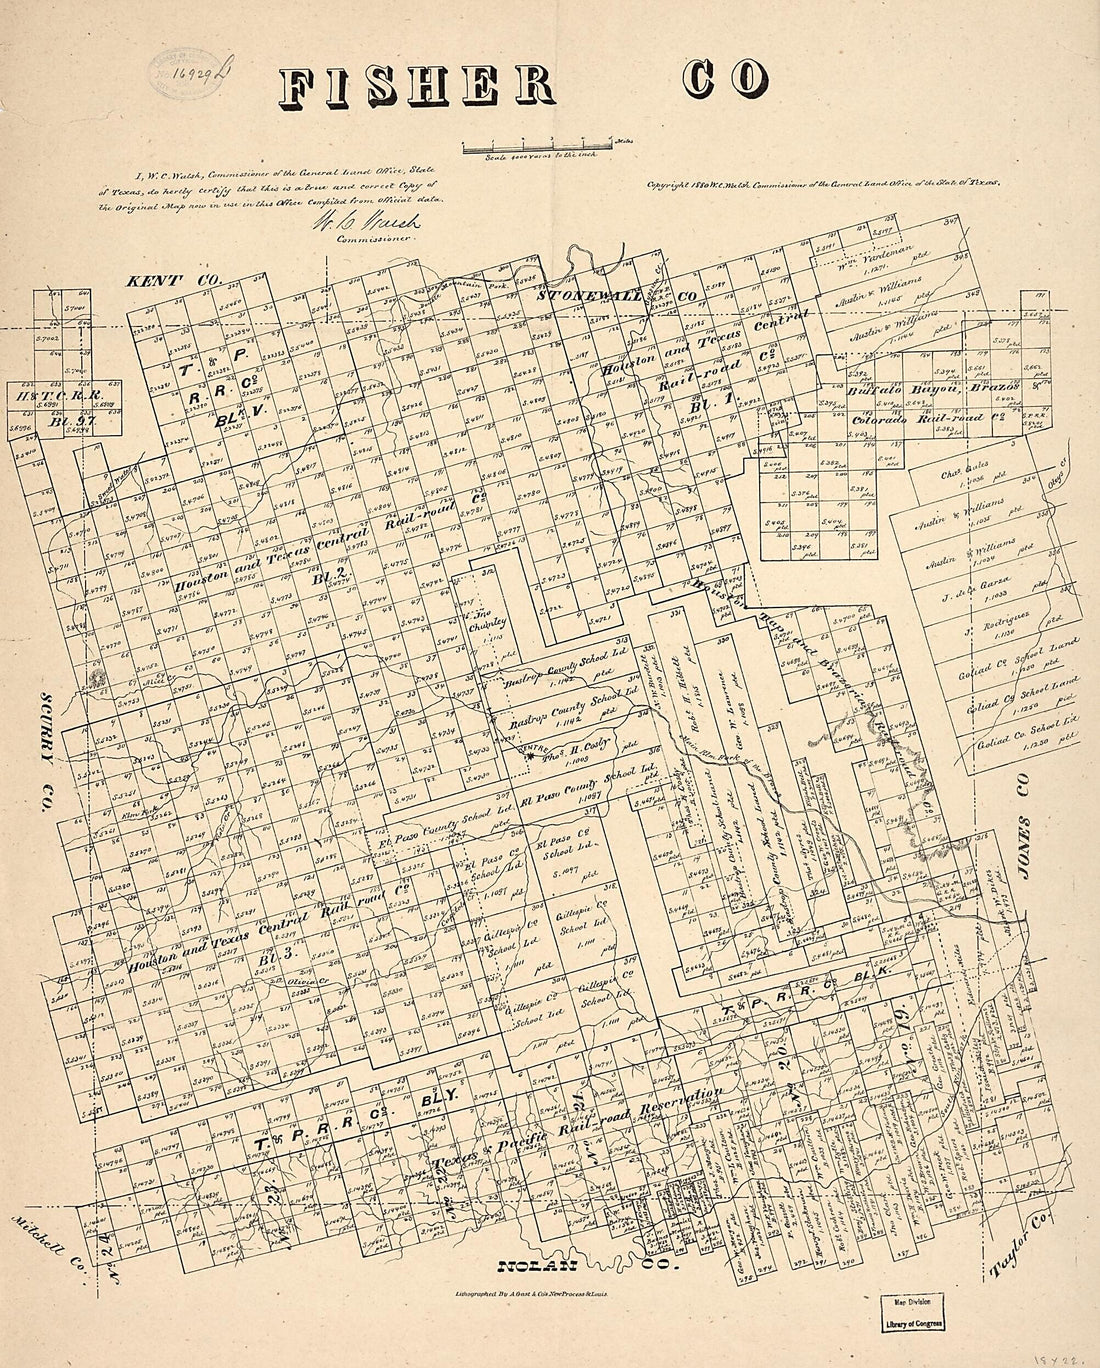 This old map of Fisher County (Fisher County) from 1880 was created by  Texas. General Land Office, W. C. (William C.) Walsh in 1880